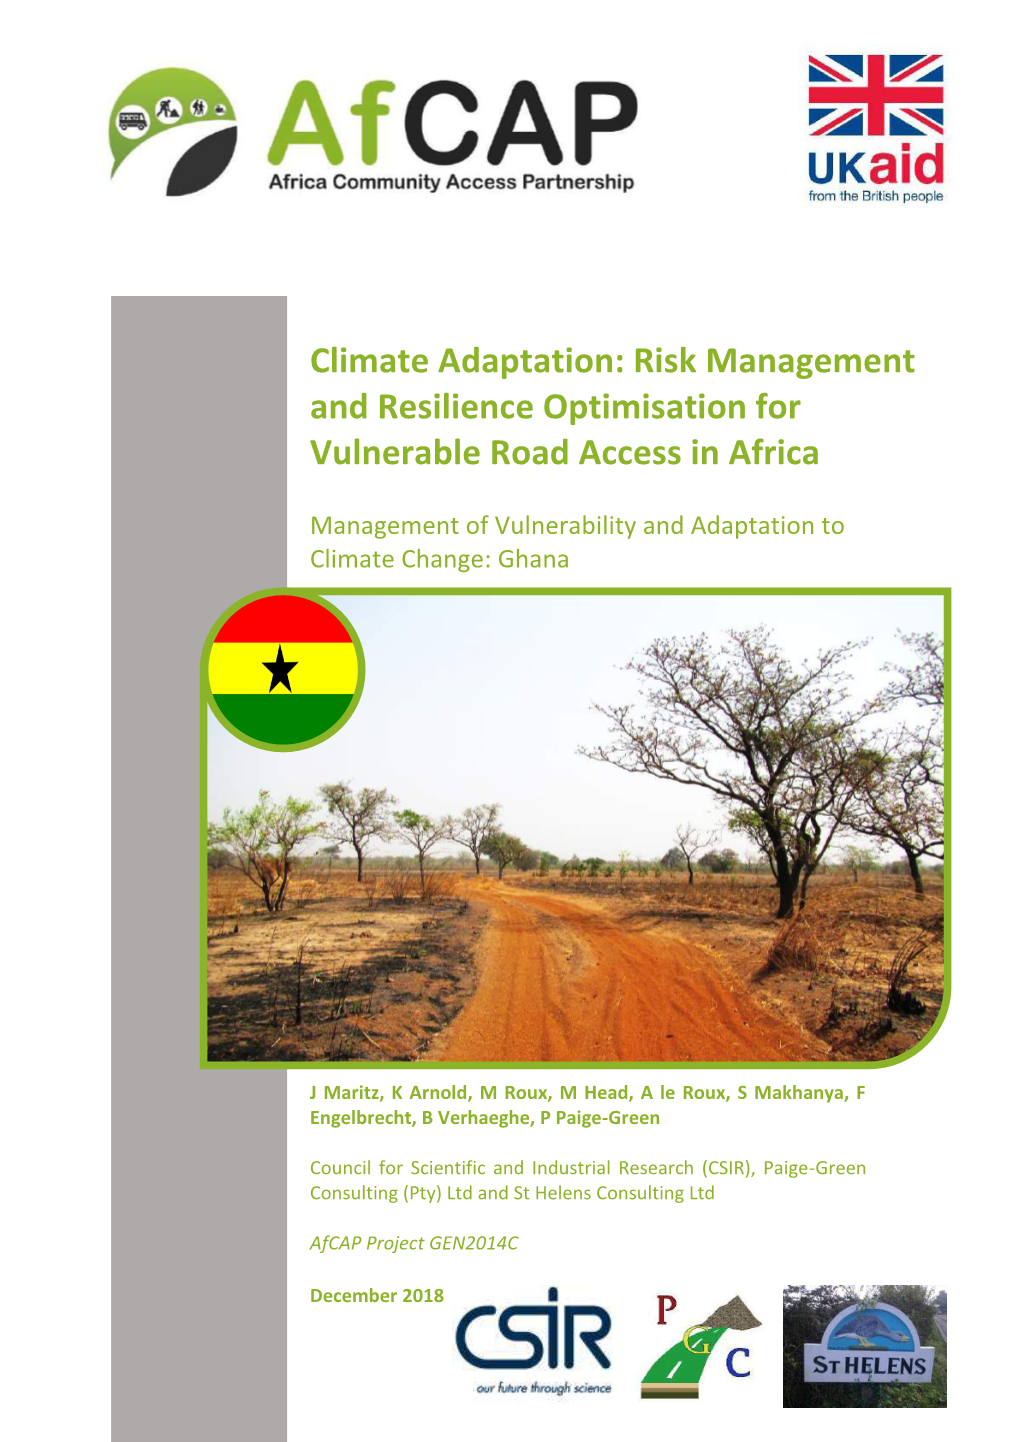 Climate Adaptation: Risk Management and Resilience Optimisation for Vulnerable Road Access in Africa